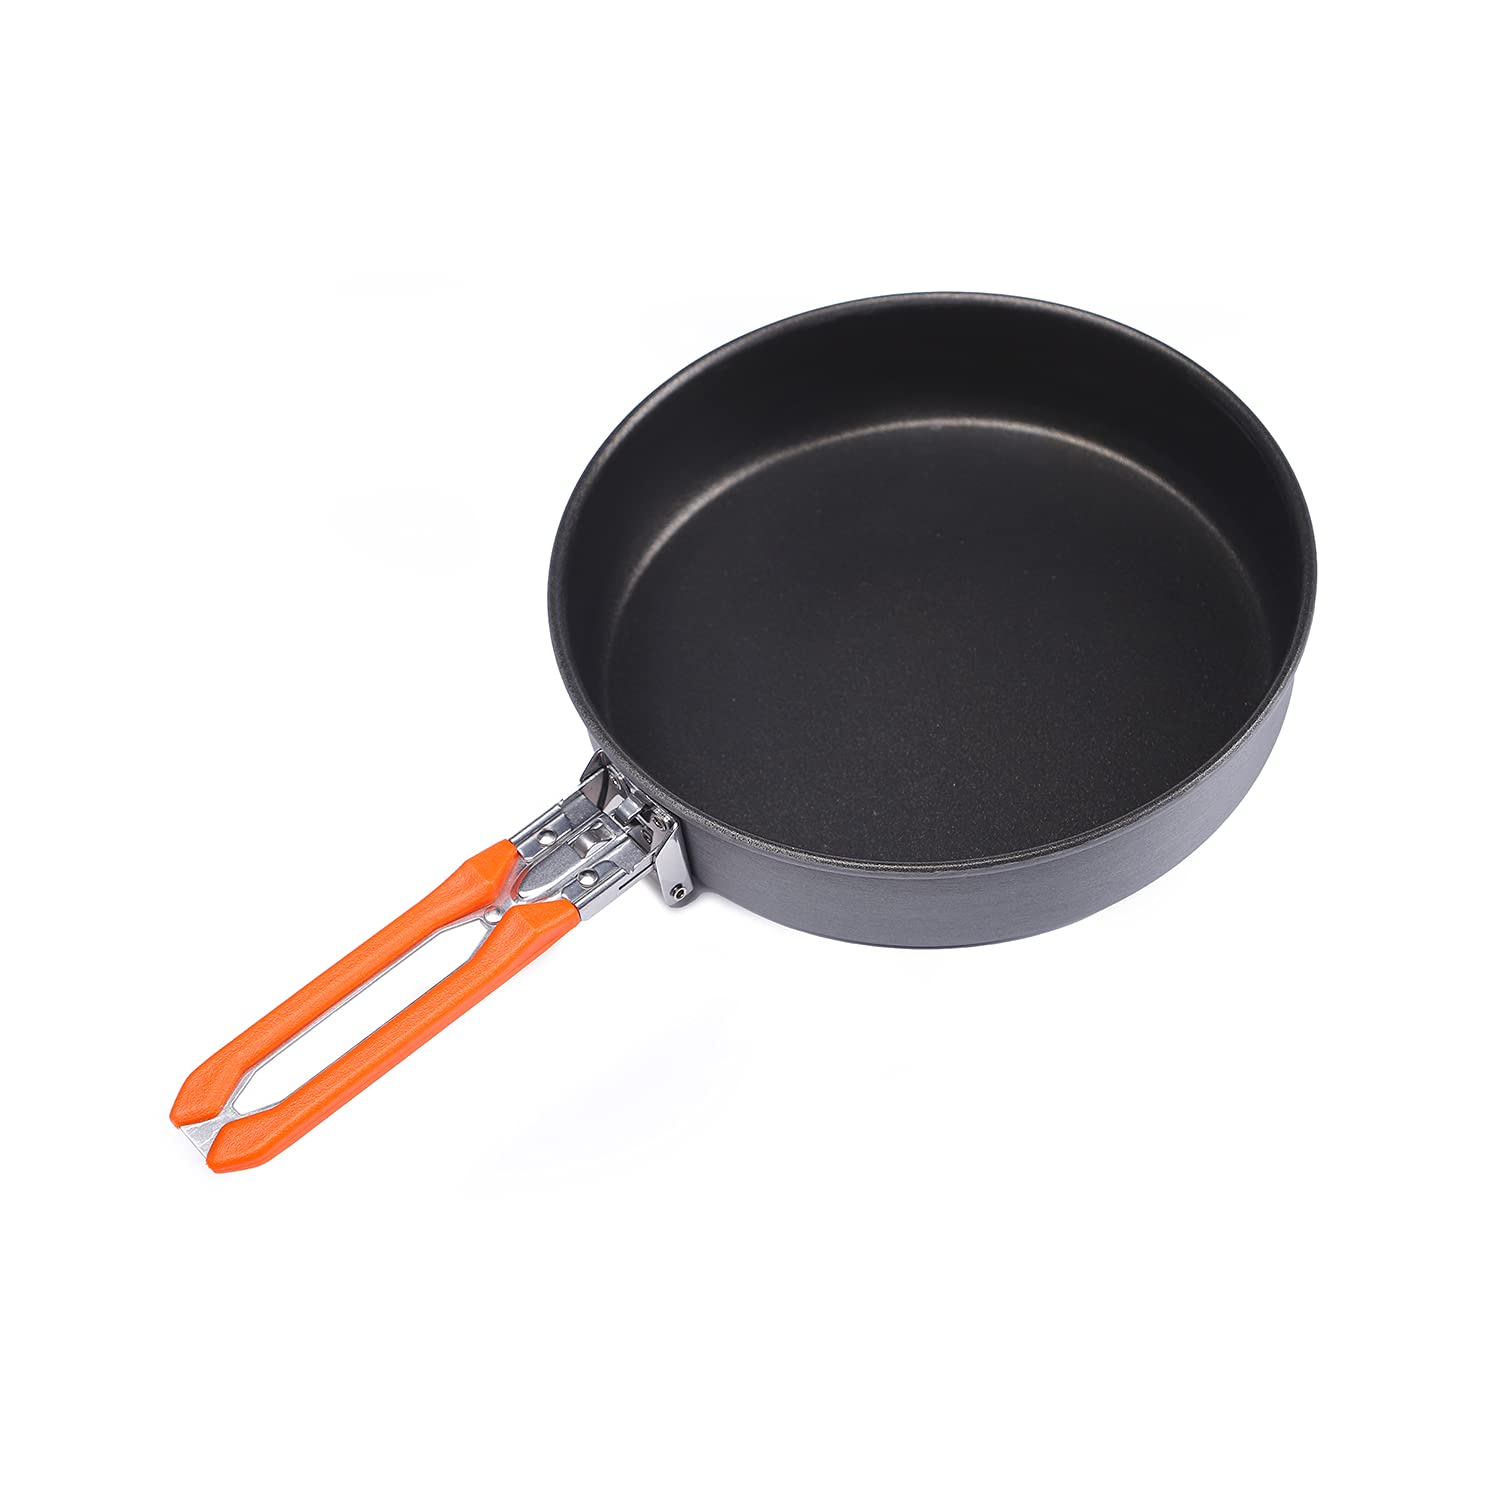 Fire Maple Outdoor Cookware and Camping Accessories